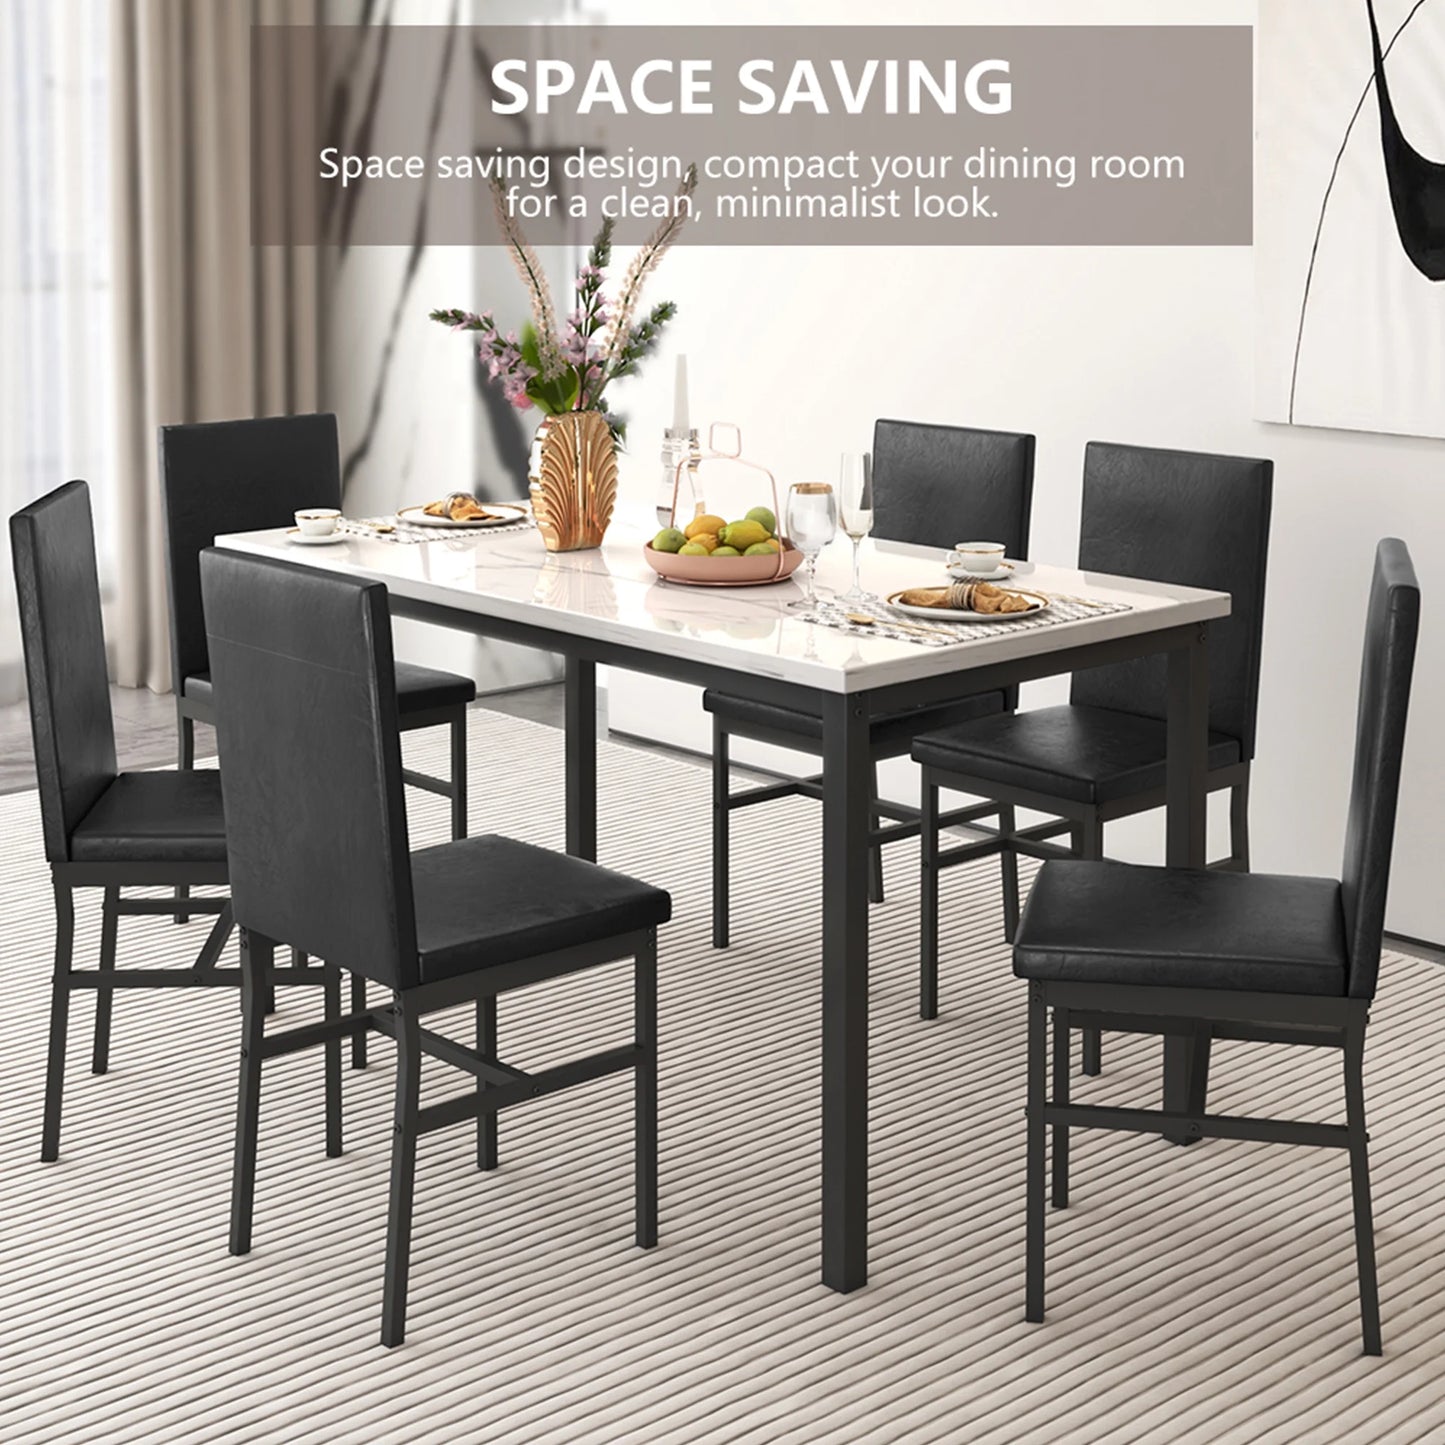 7 Piece Kitchen Dining Table & Chair Set, Dining Room Table Set with Faux Marble Tabletop PU Leather Padded Chairs, Rectangle Dining Table Set for 6, Dinette Set for Kitchen Dining Room Small Space